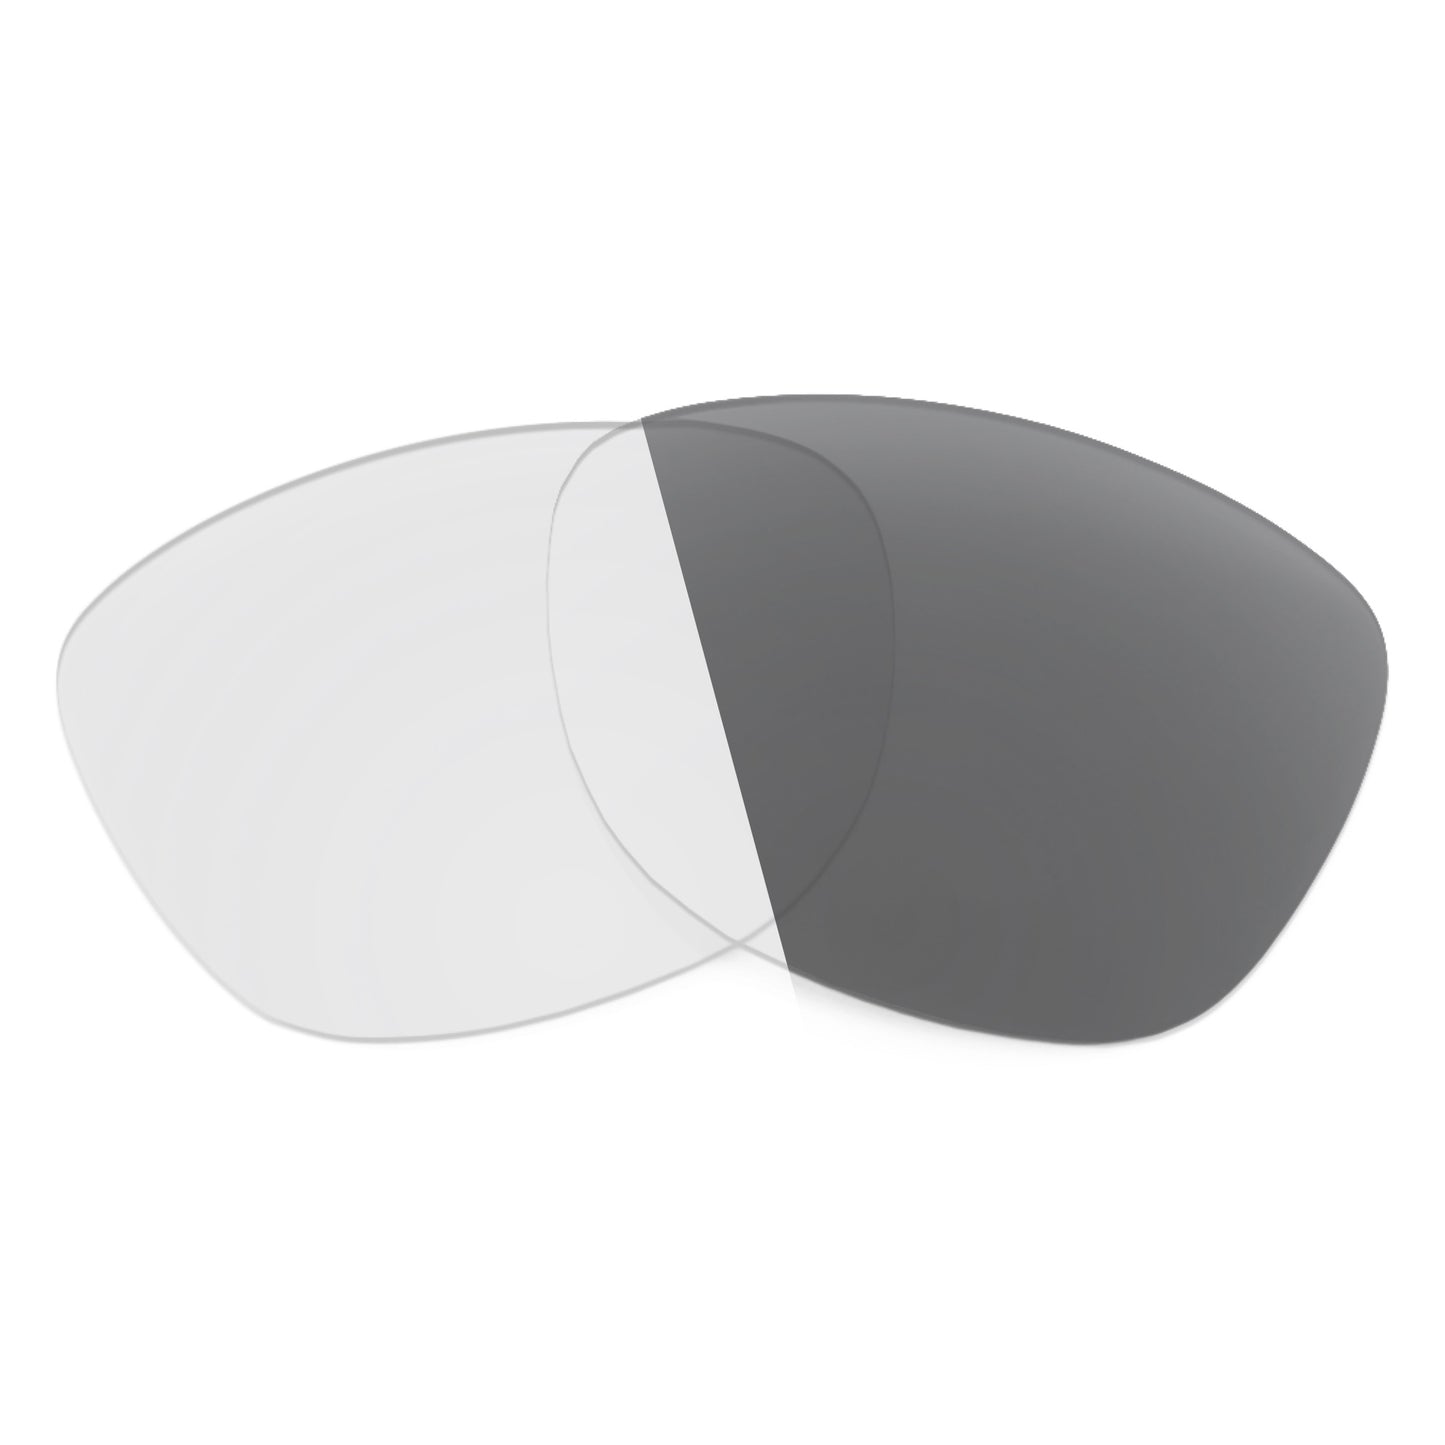 Revant replacement lenses for Ray-Ban Chris RB4187 54mm Non-Polarized Adapt Gray Photochromic